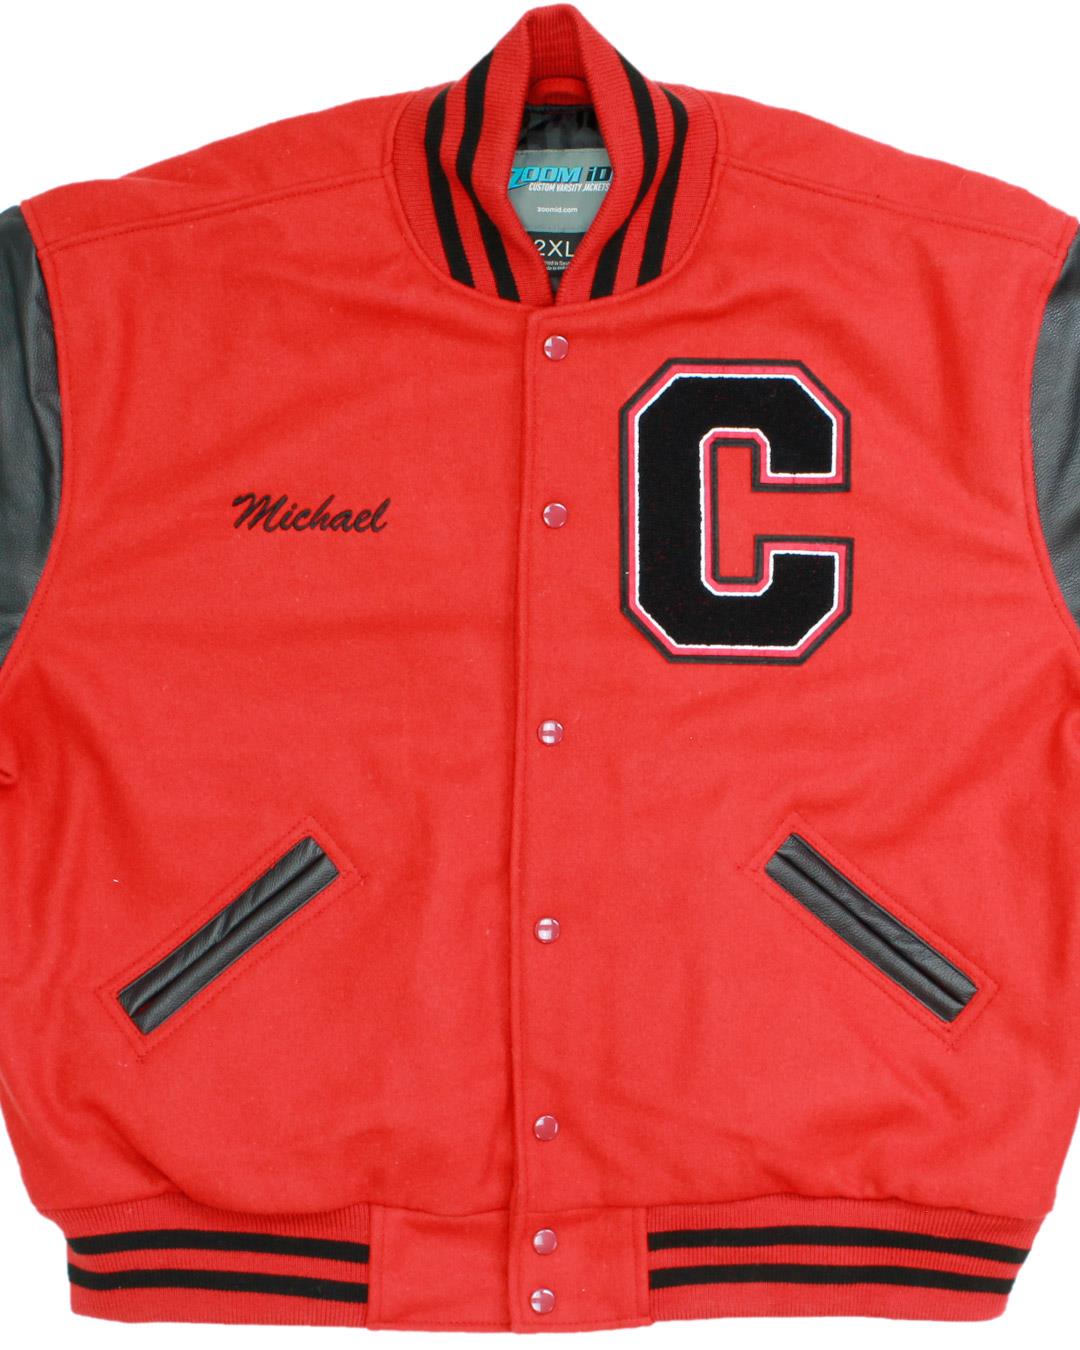 Coshocton High School Redskins Letterman Jacket, Coshocton, OH - Front